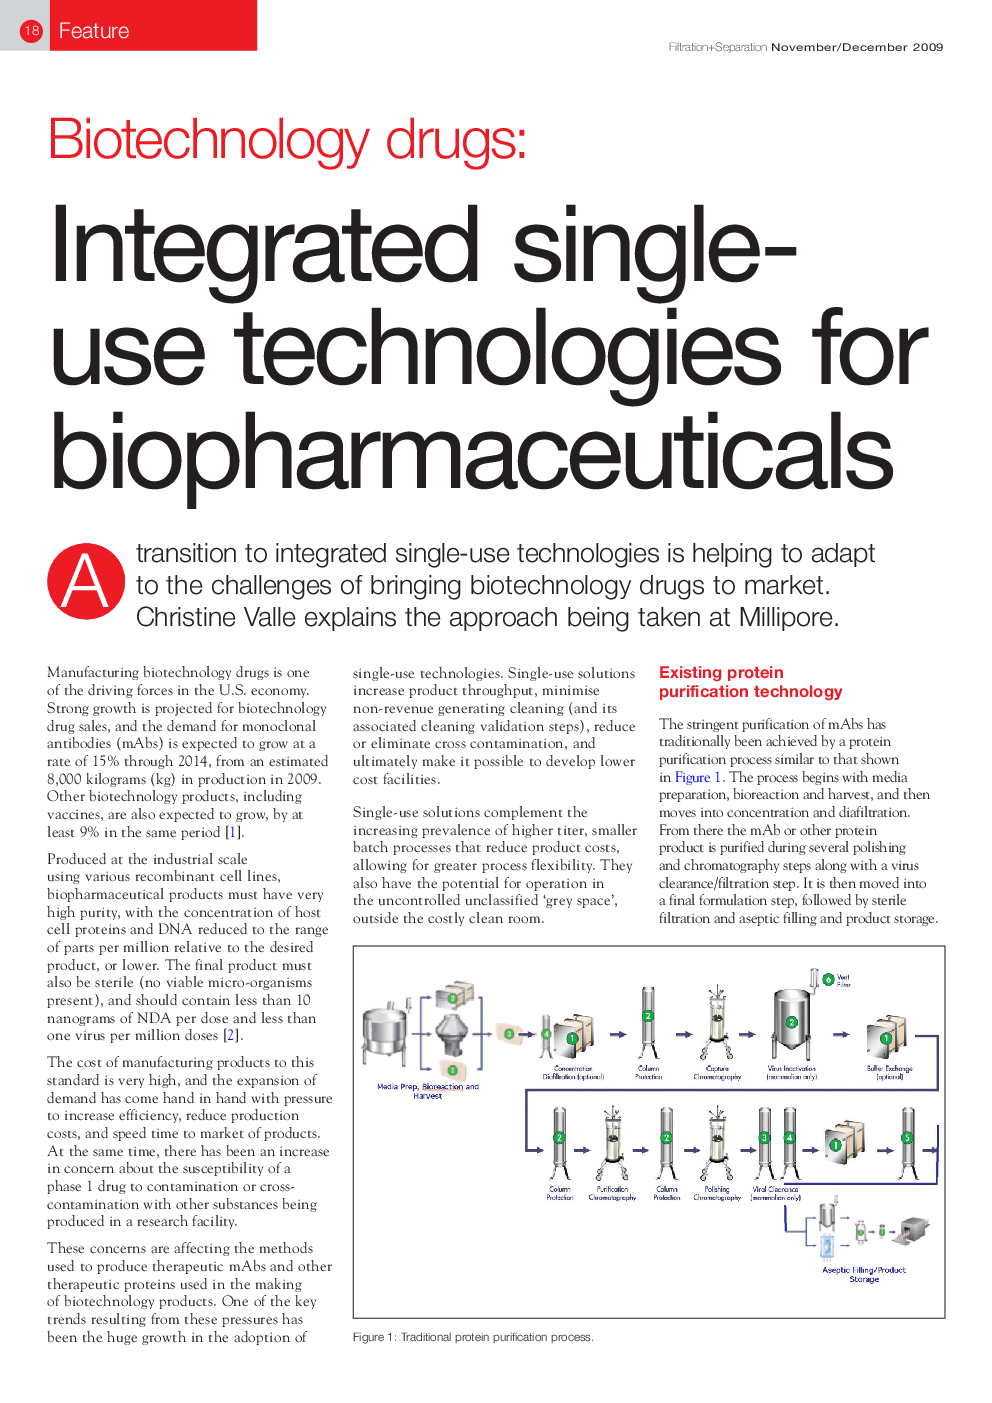 Biotechnology drugs: Integrated single-use technologies for biopharmaceuticals